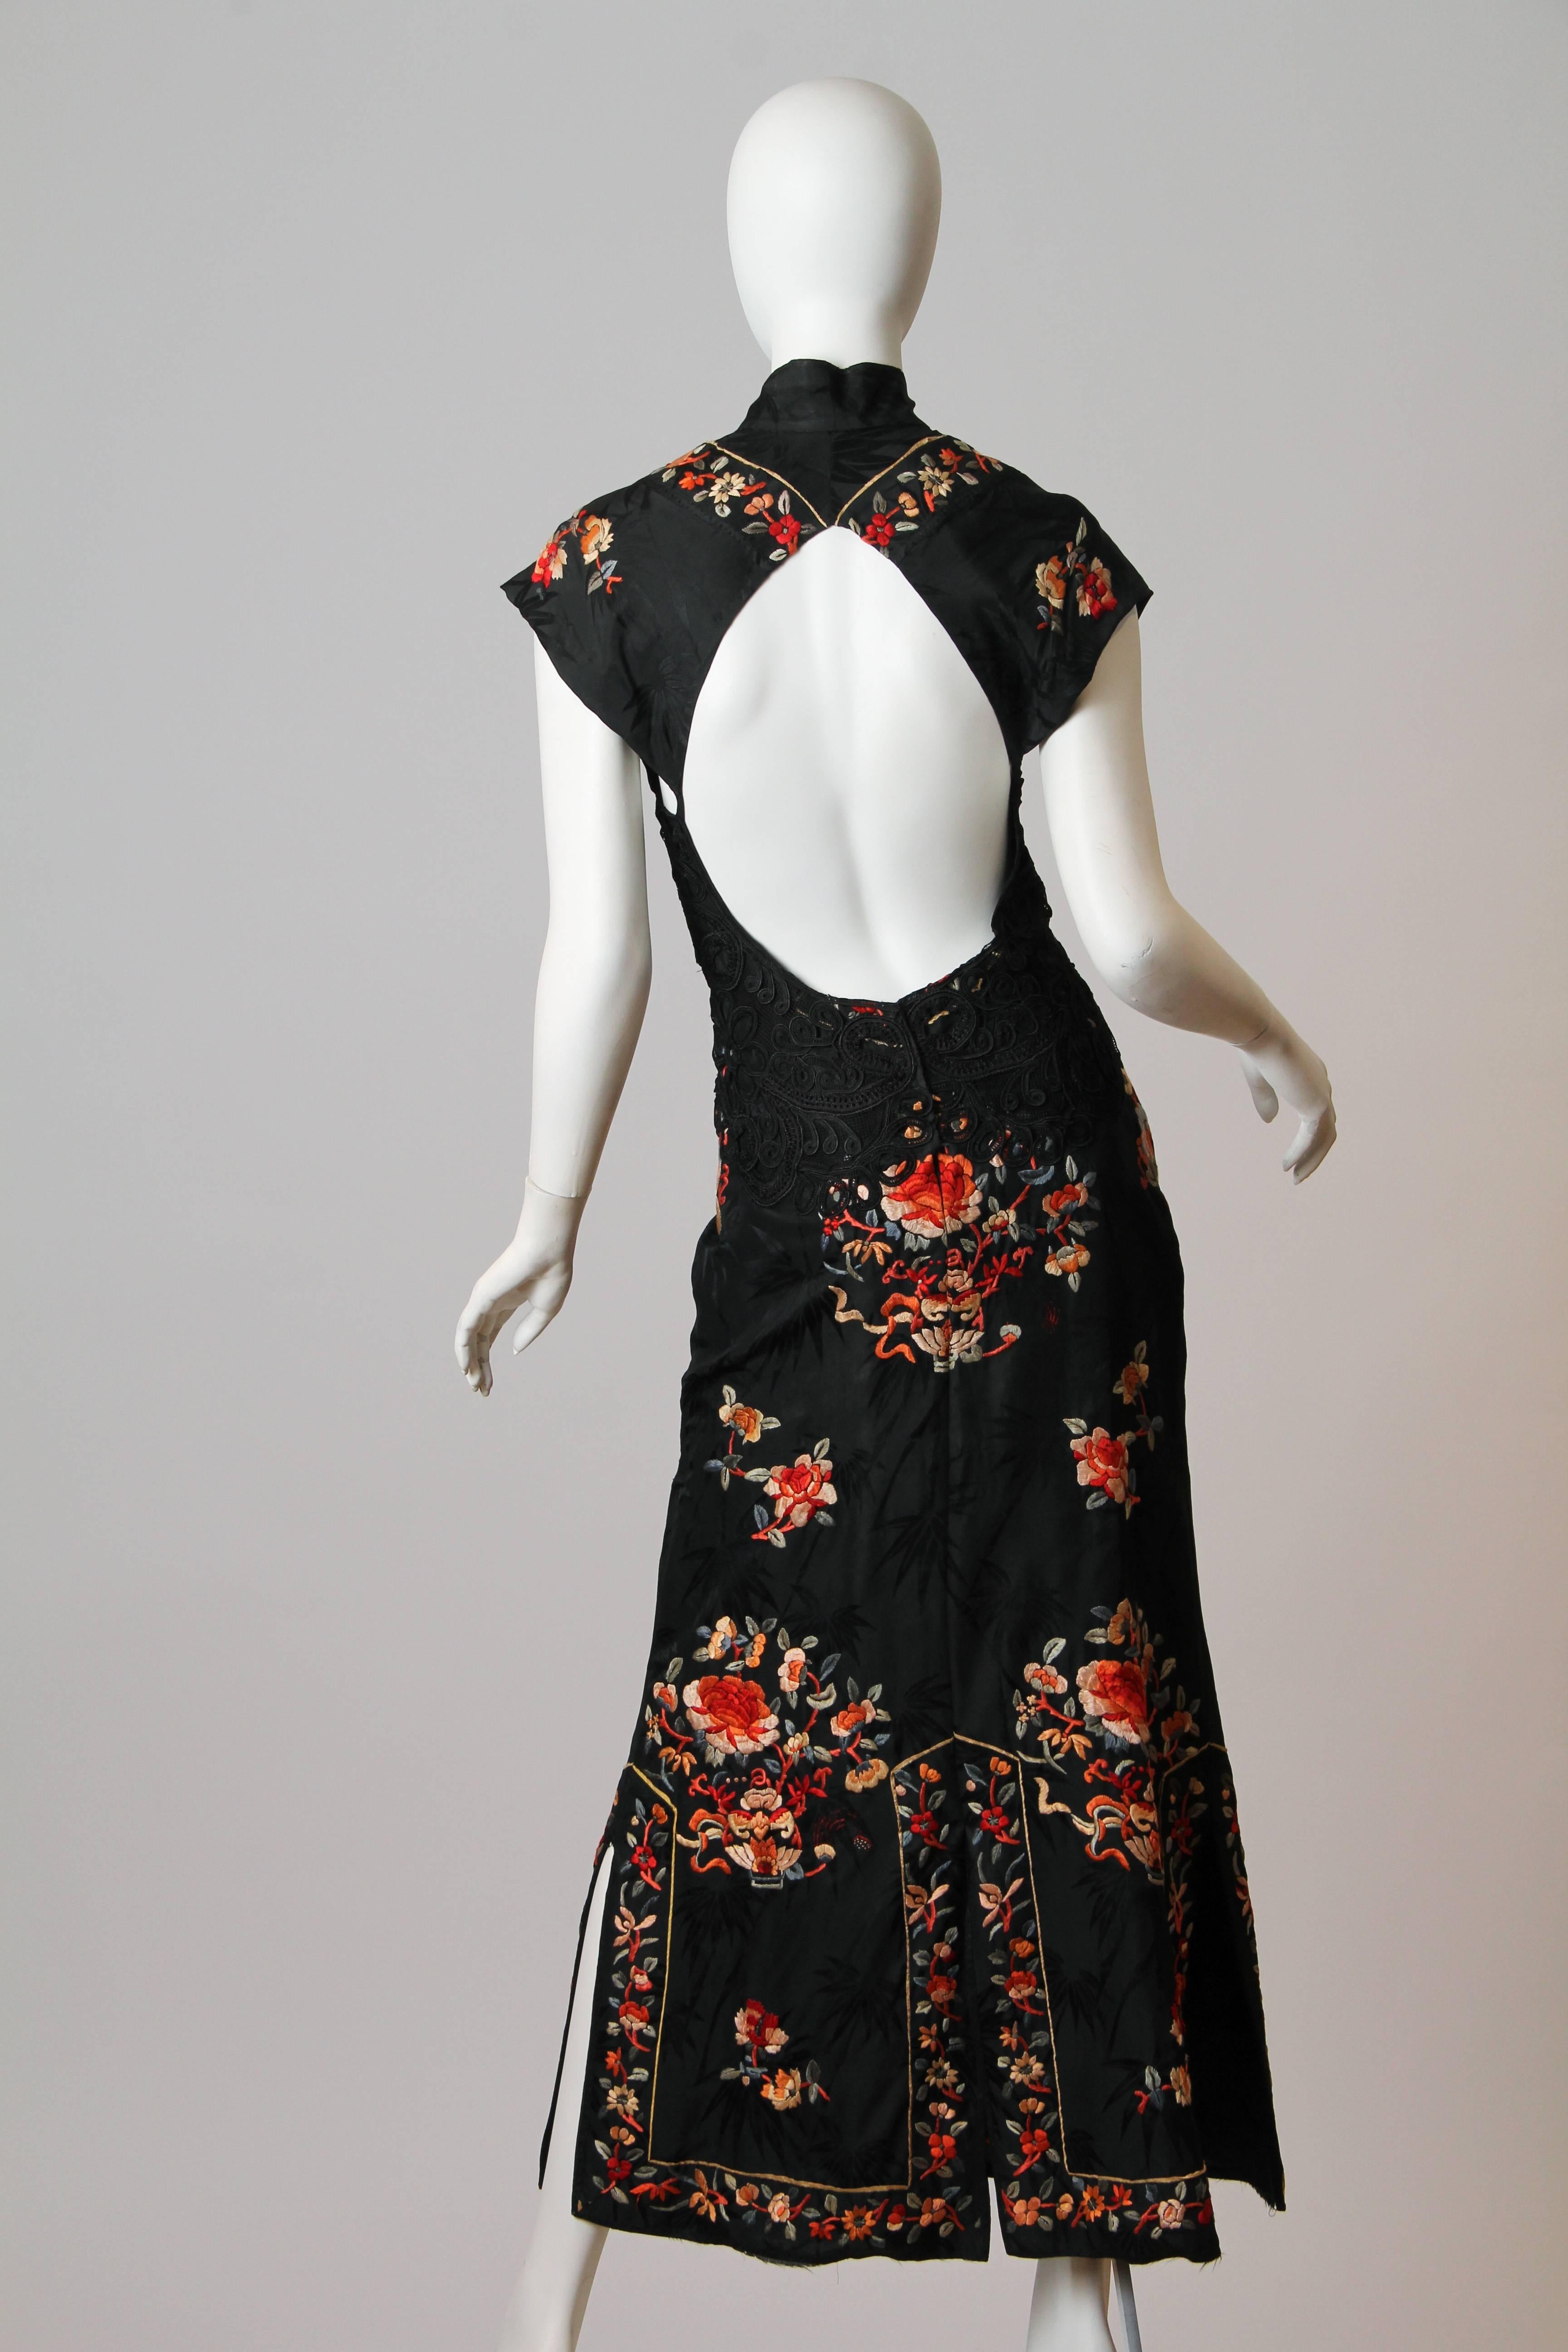 Black Backless Hand Embroidered Chinese Dress with Victorian Lace